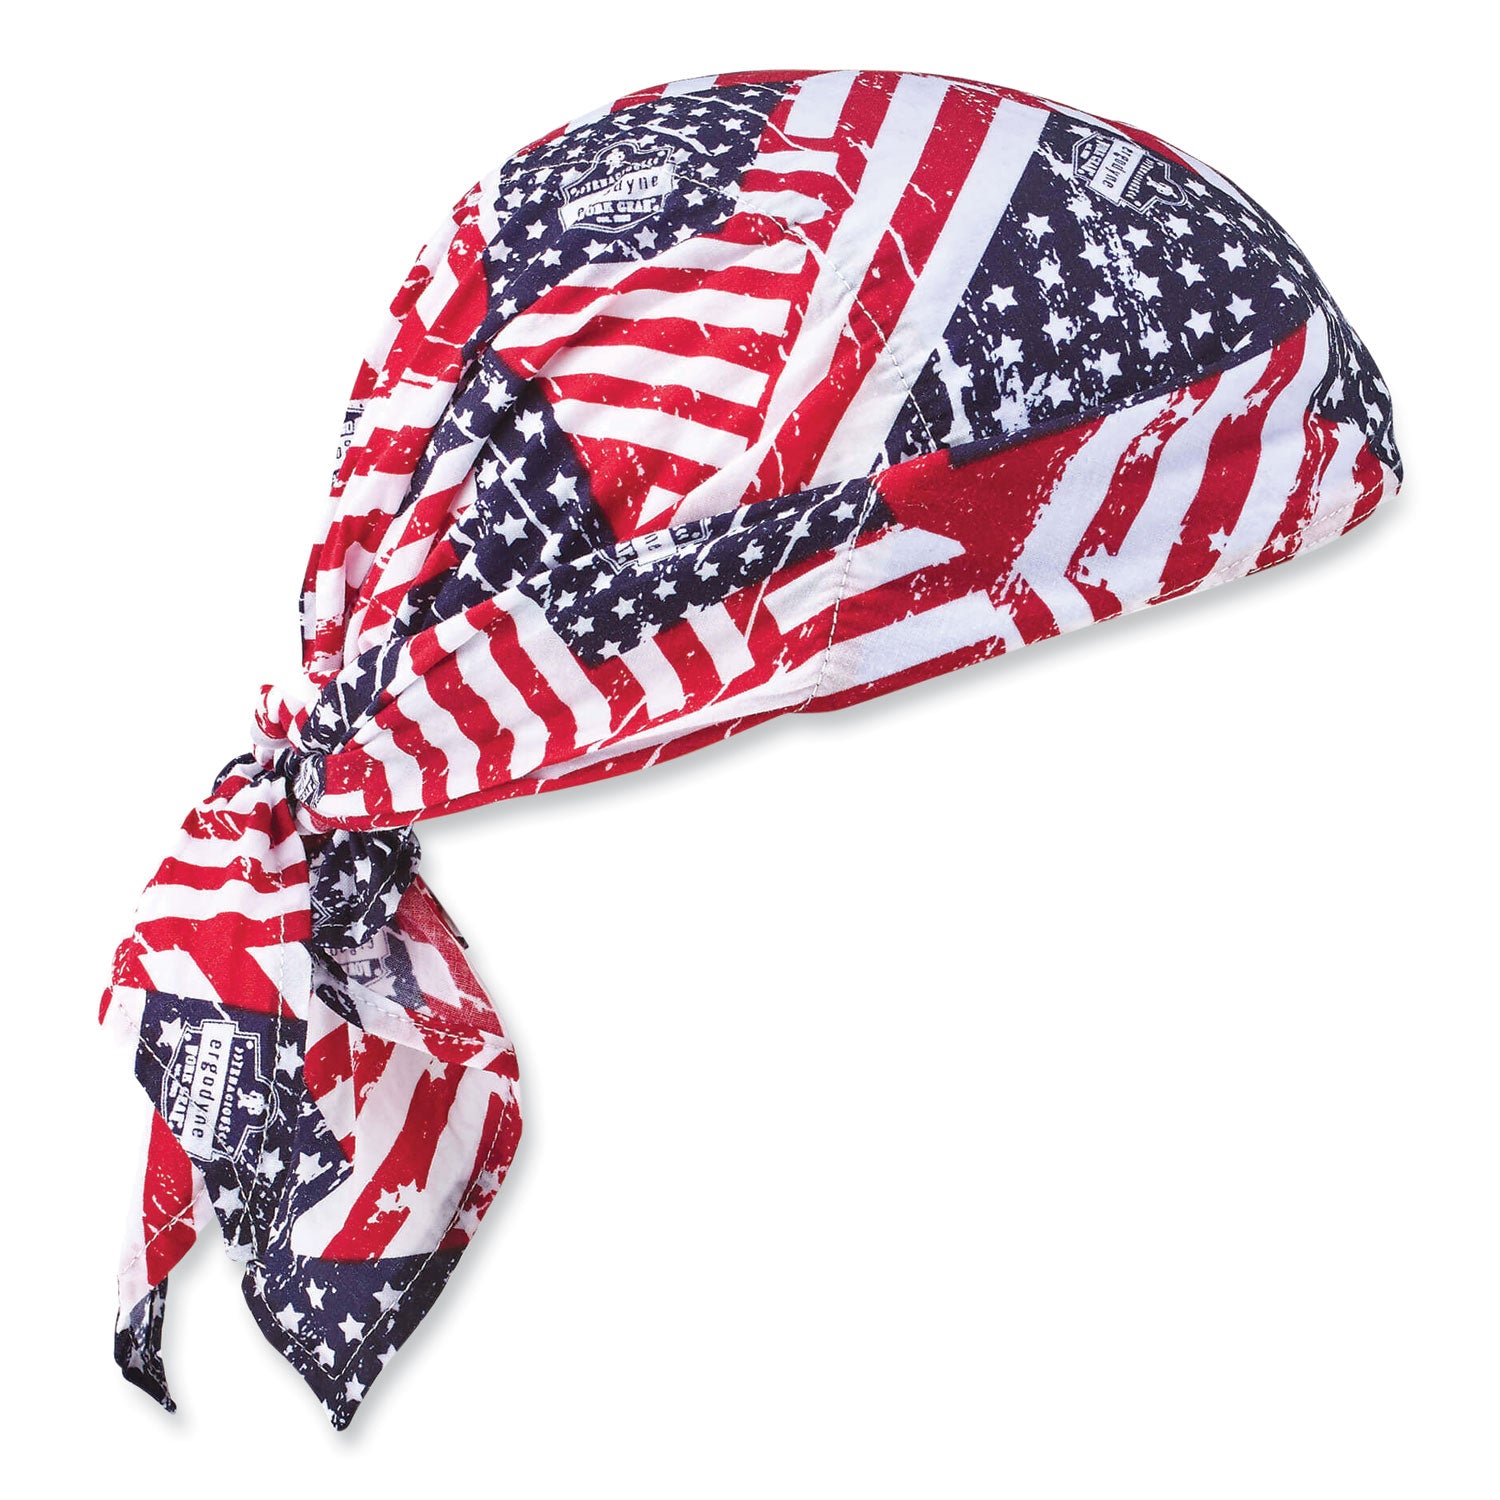 chill-its-6710-cooling-embedded-polymers-tie-bandana-triangle-hat-one-size-stars-and-stripes-ships-in-1-3-business-days_ego12323 - 1